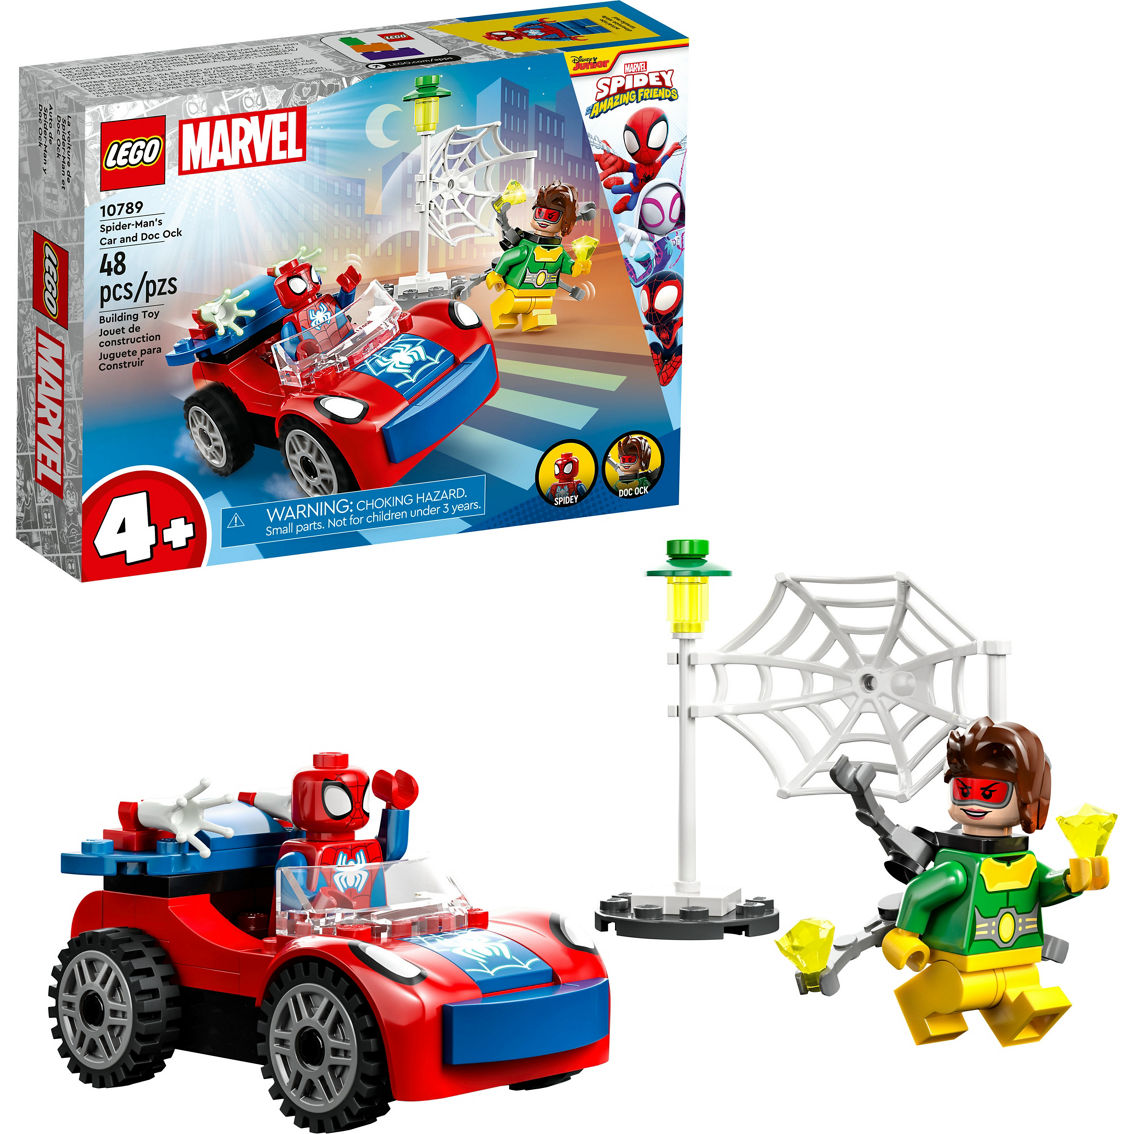 Lego Spidey Spider-Man's Car and Doc Ock 10789 - Image 3 of 7